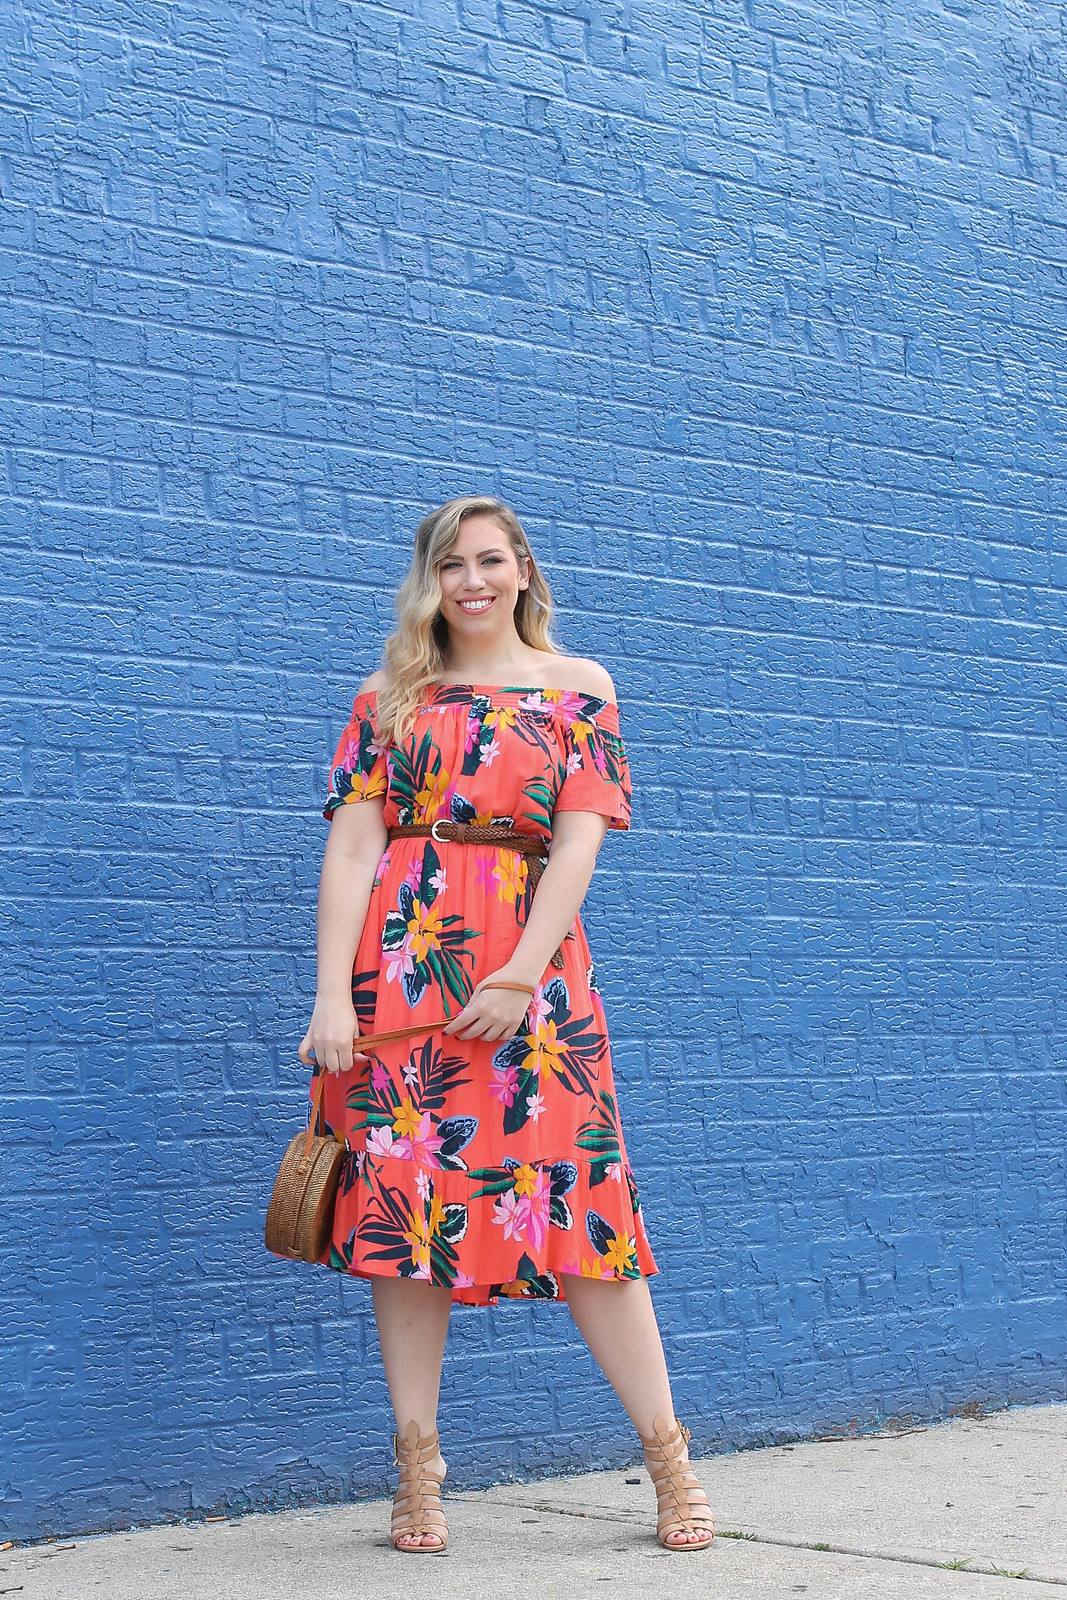 Coral Floral Off Shoulder Summer Dress Under $40 Bright Blue Brick Wall Colorful Outfit Inspiration